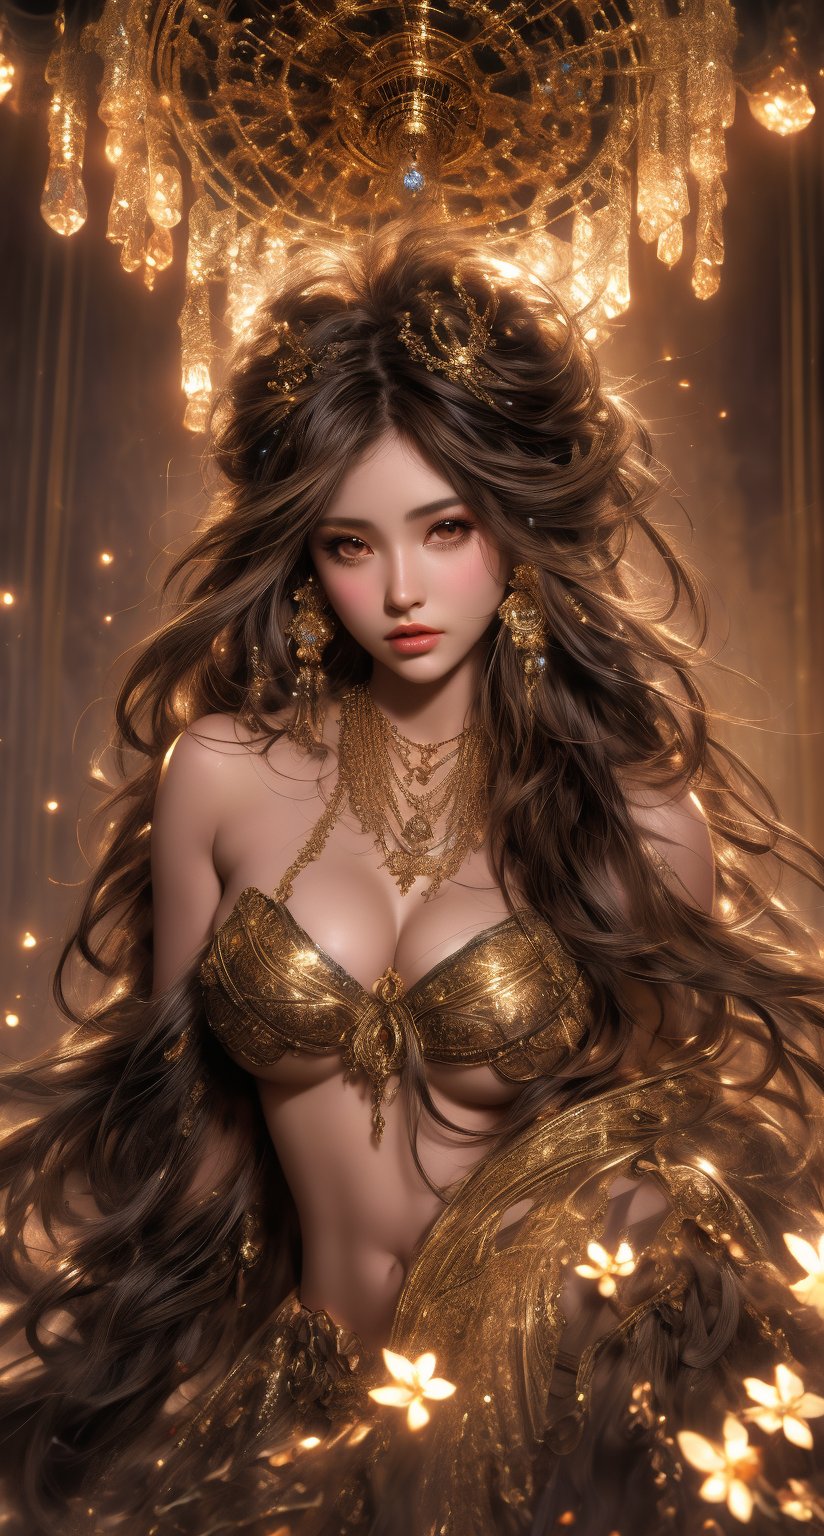 Hyper-realistic digital painting of a beautiful girl, full body, shiny dark brown eyes, messy mid-length hair with golden highlights, beautiful gypsy necklace with intricate details, in a surreal and fantasy setting, combining the artistic styles of Jose Royo, Boris Vallejo, Julie Bell, Carne Griffiths, Benedick Bana, Brian Froud and Eric Wallis, precise anatomy, global light, chiaroscuro, ray tracing